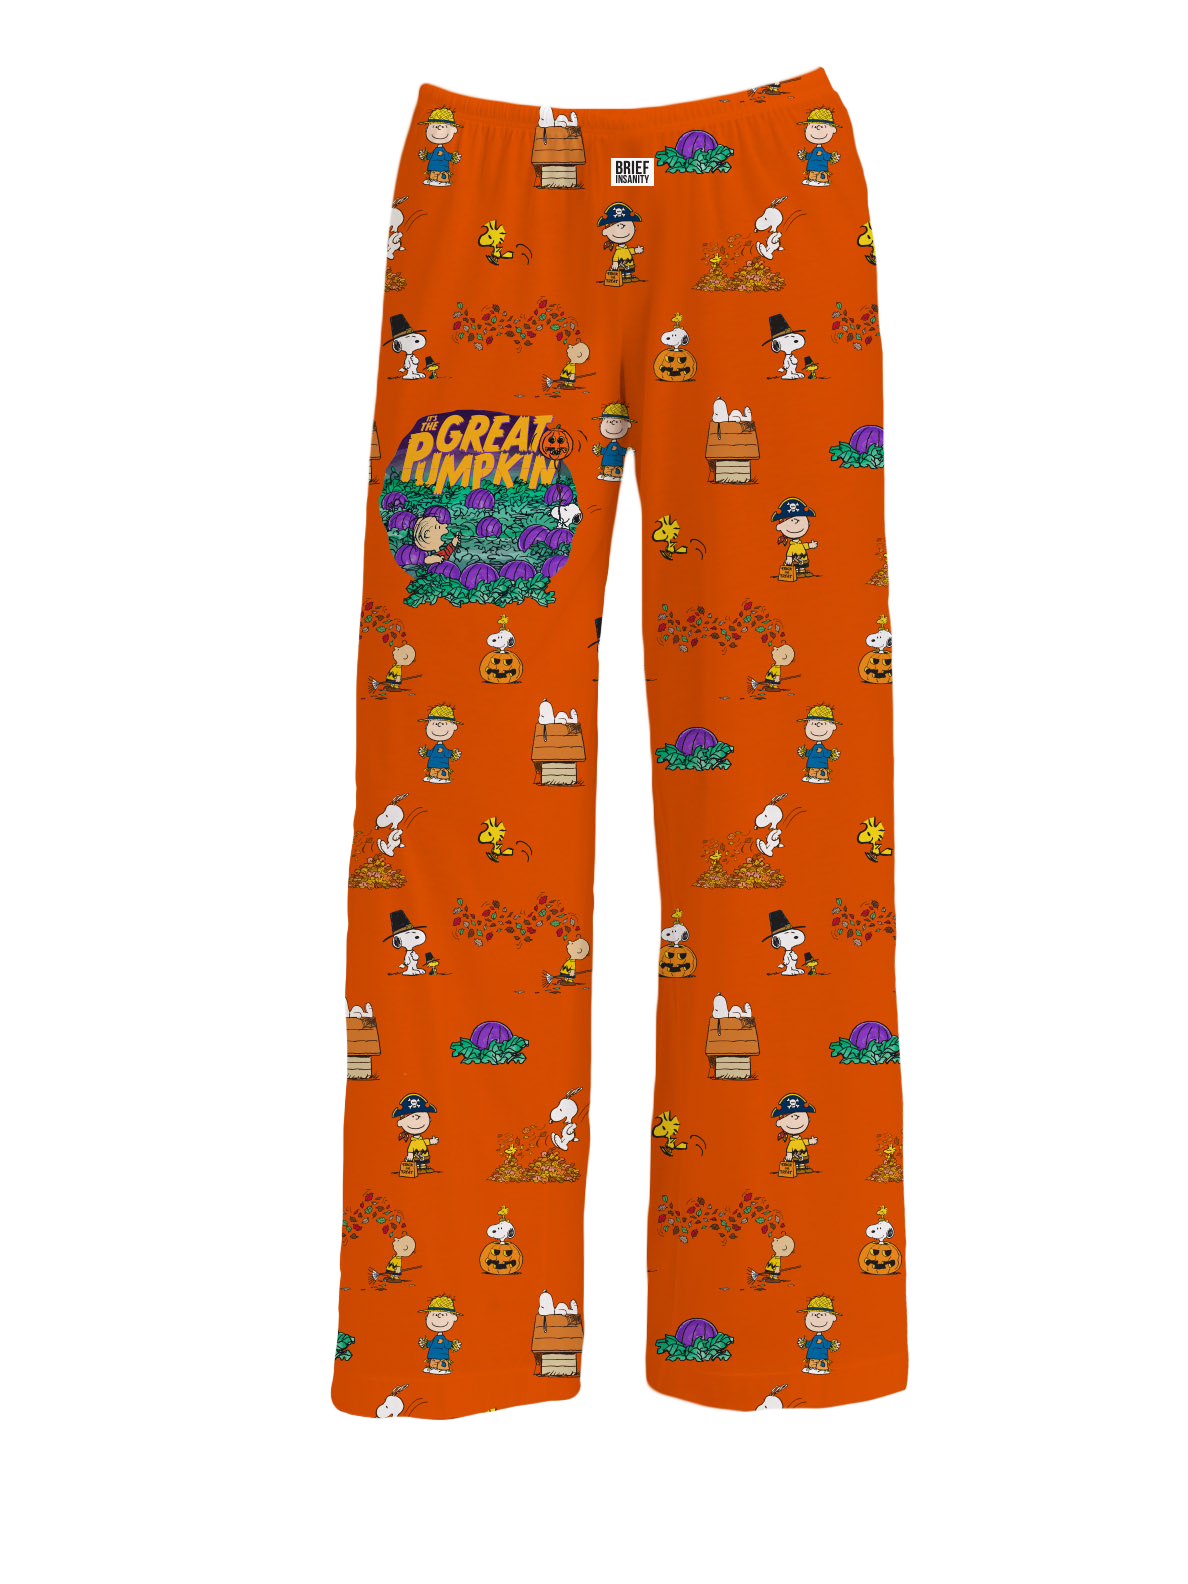 Snoopy and Friends Pajama Pants and More, Brief Insanity